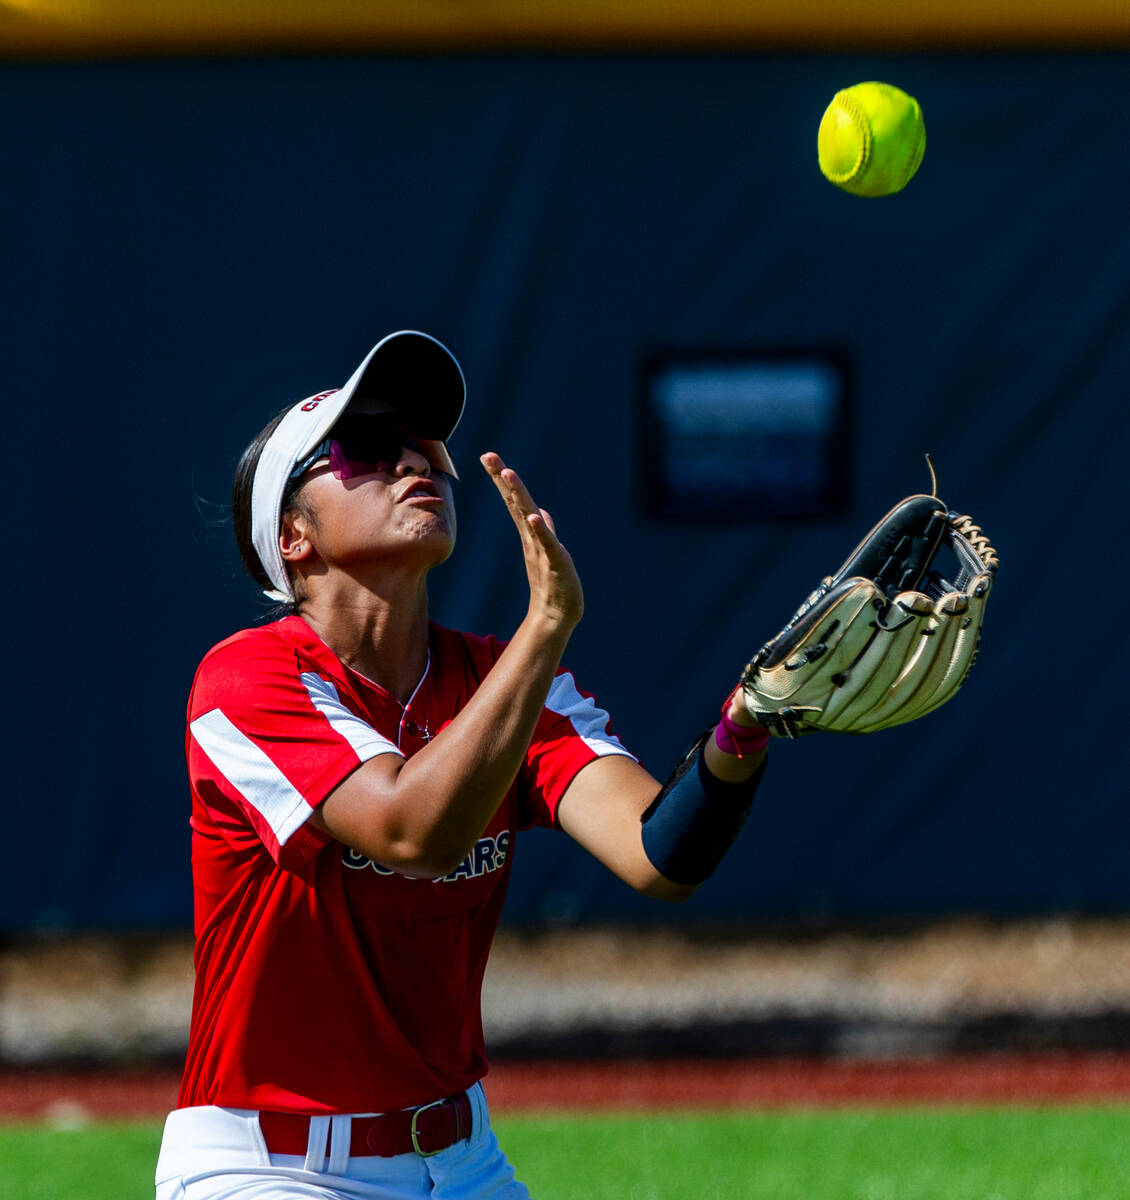 Coronado outfielder Alohi Mundon (8) eyes a pop fly against a Palo Verde batter during the thir ...